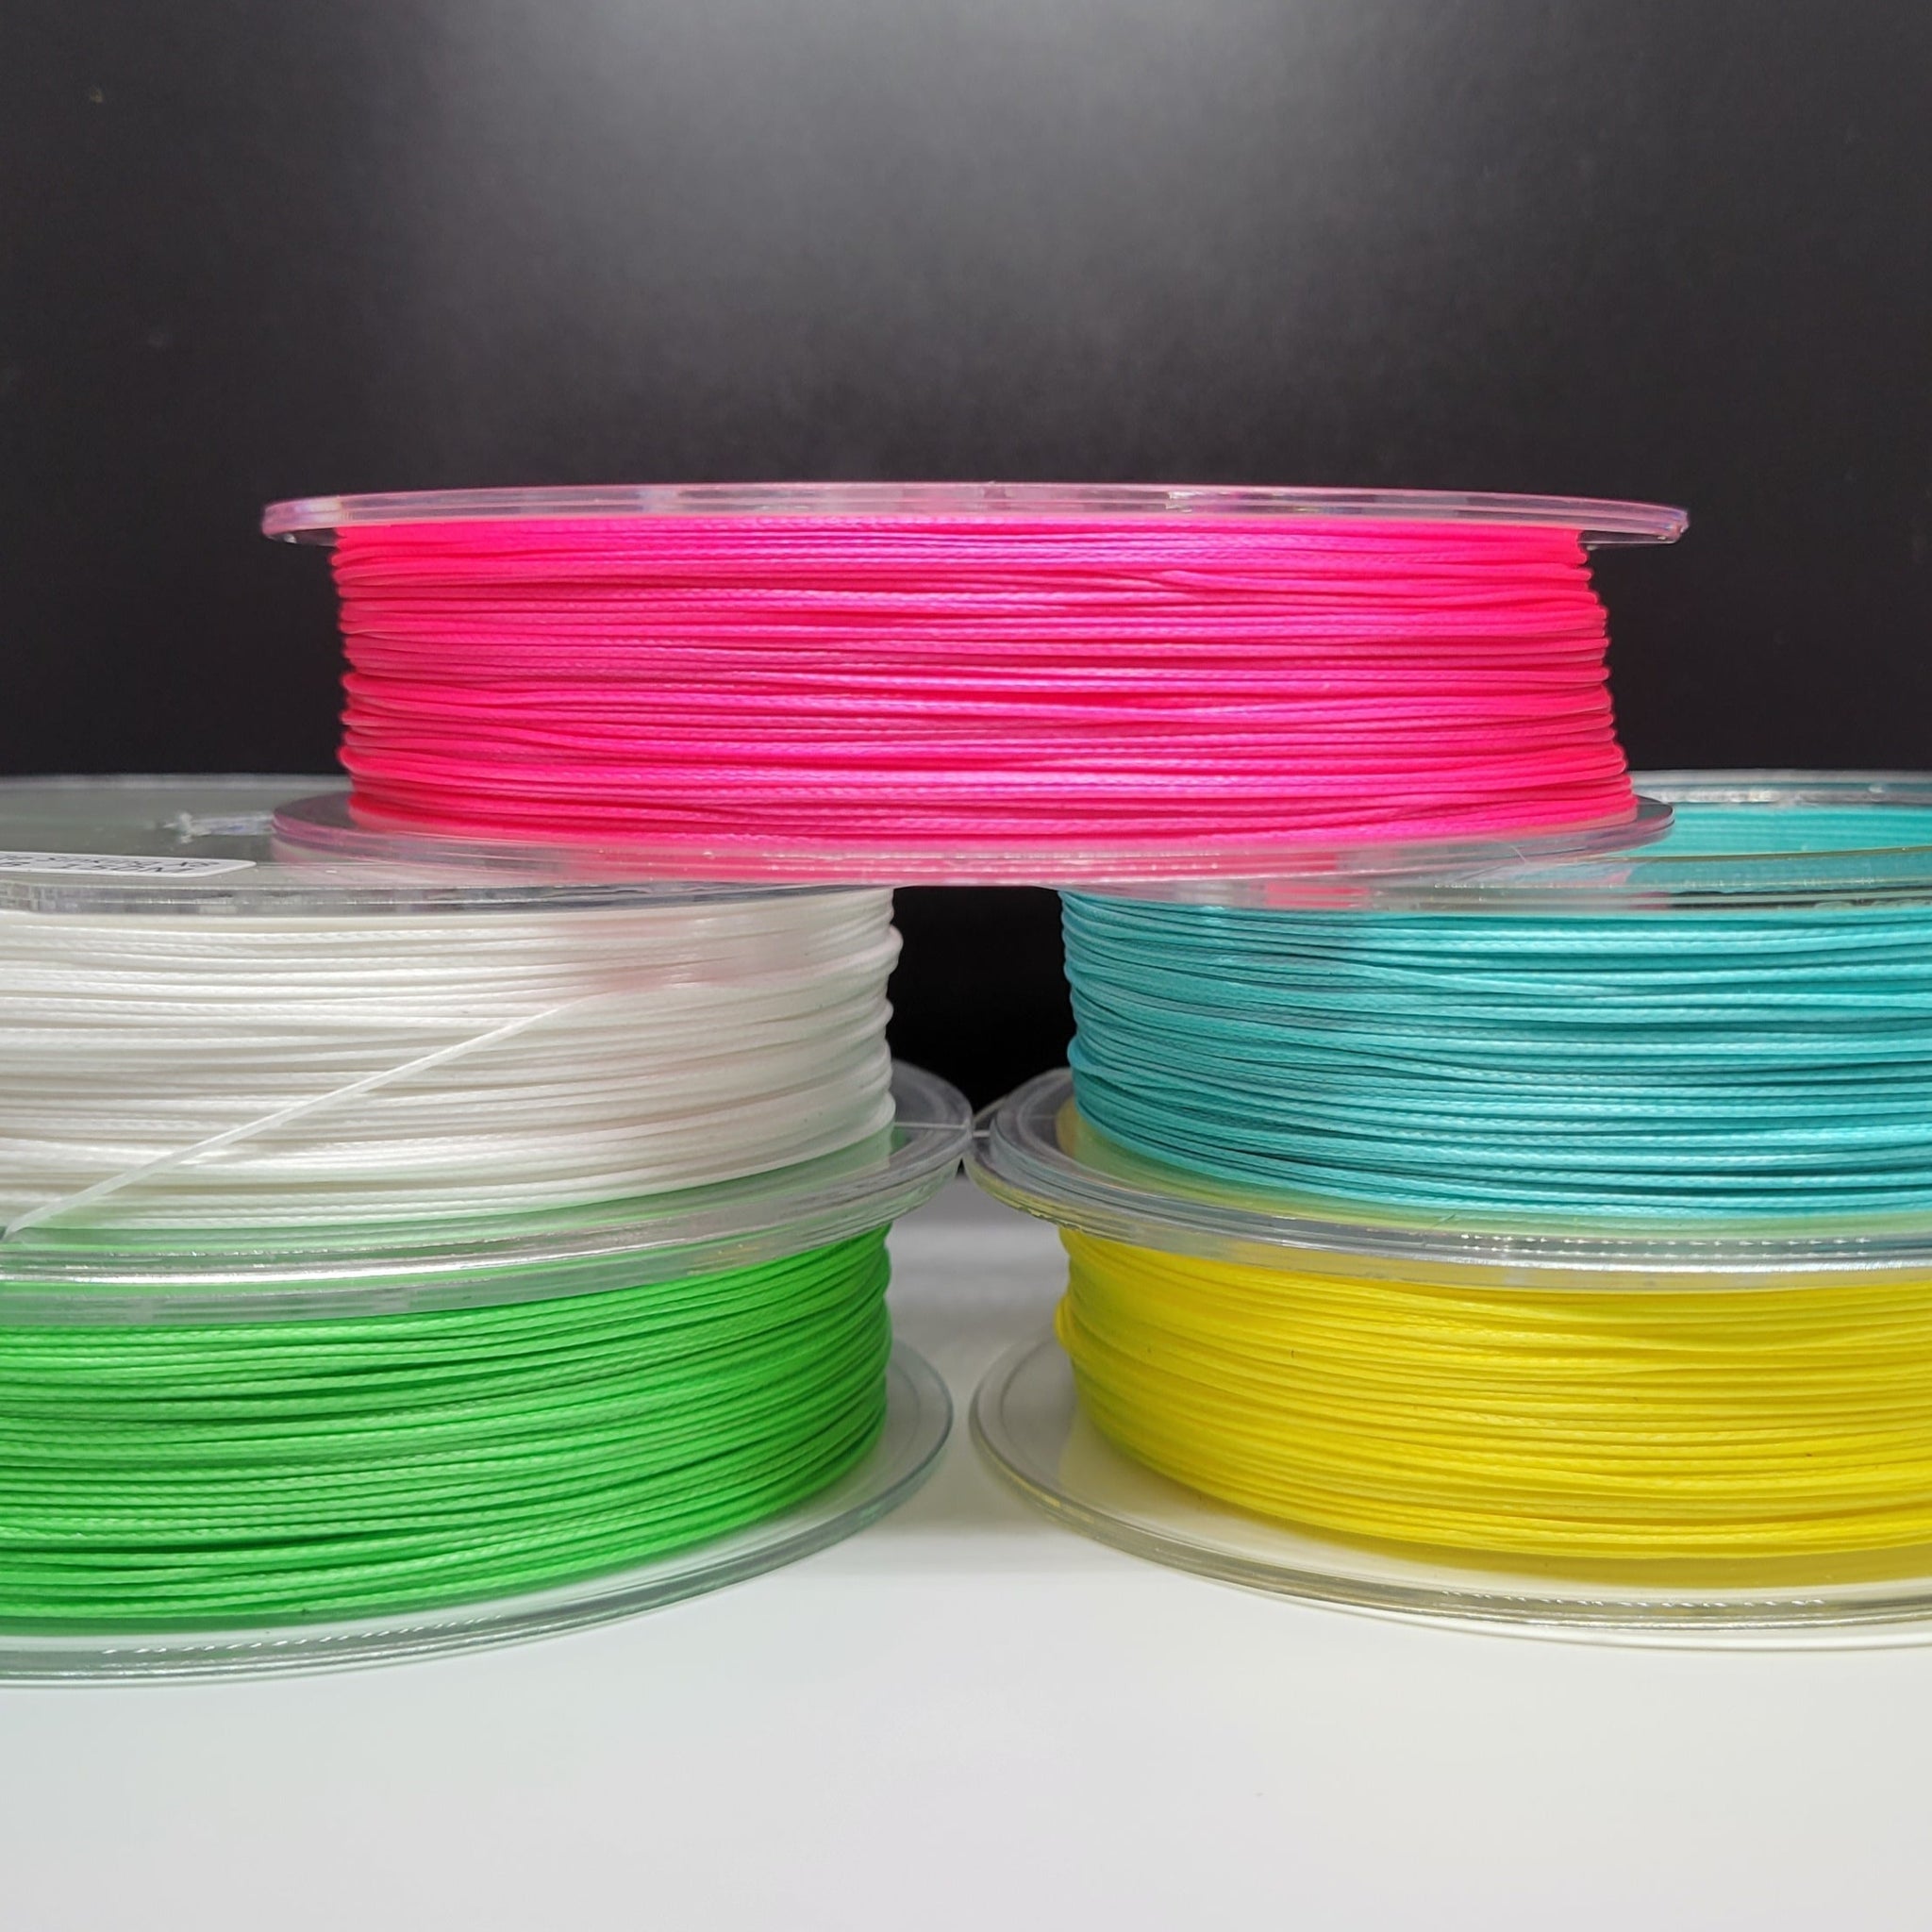 Slime Line Fishing Line - Welcome to the future of extreme high vis fishing  line. Slime Line's High-Vis Slime Green is introduced with a advanced  chemical treatment that offers brighter color,less fade